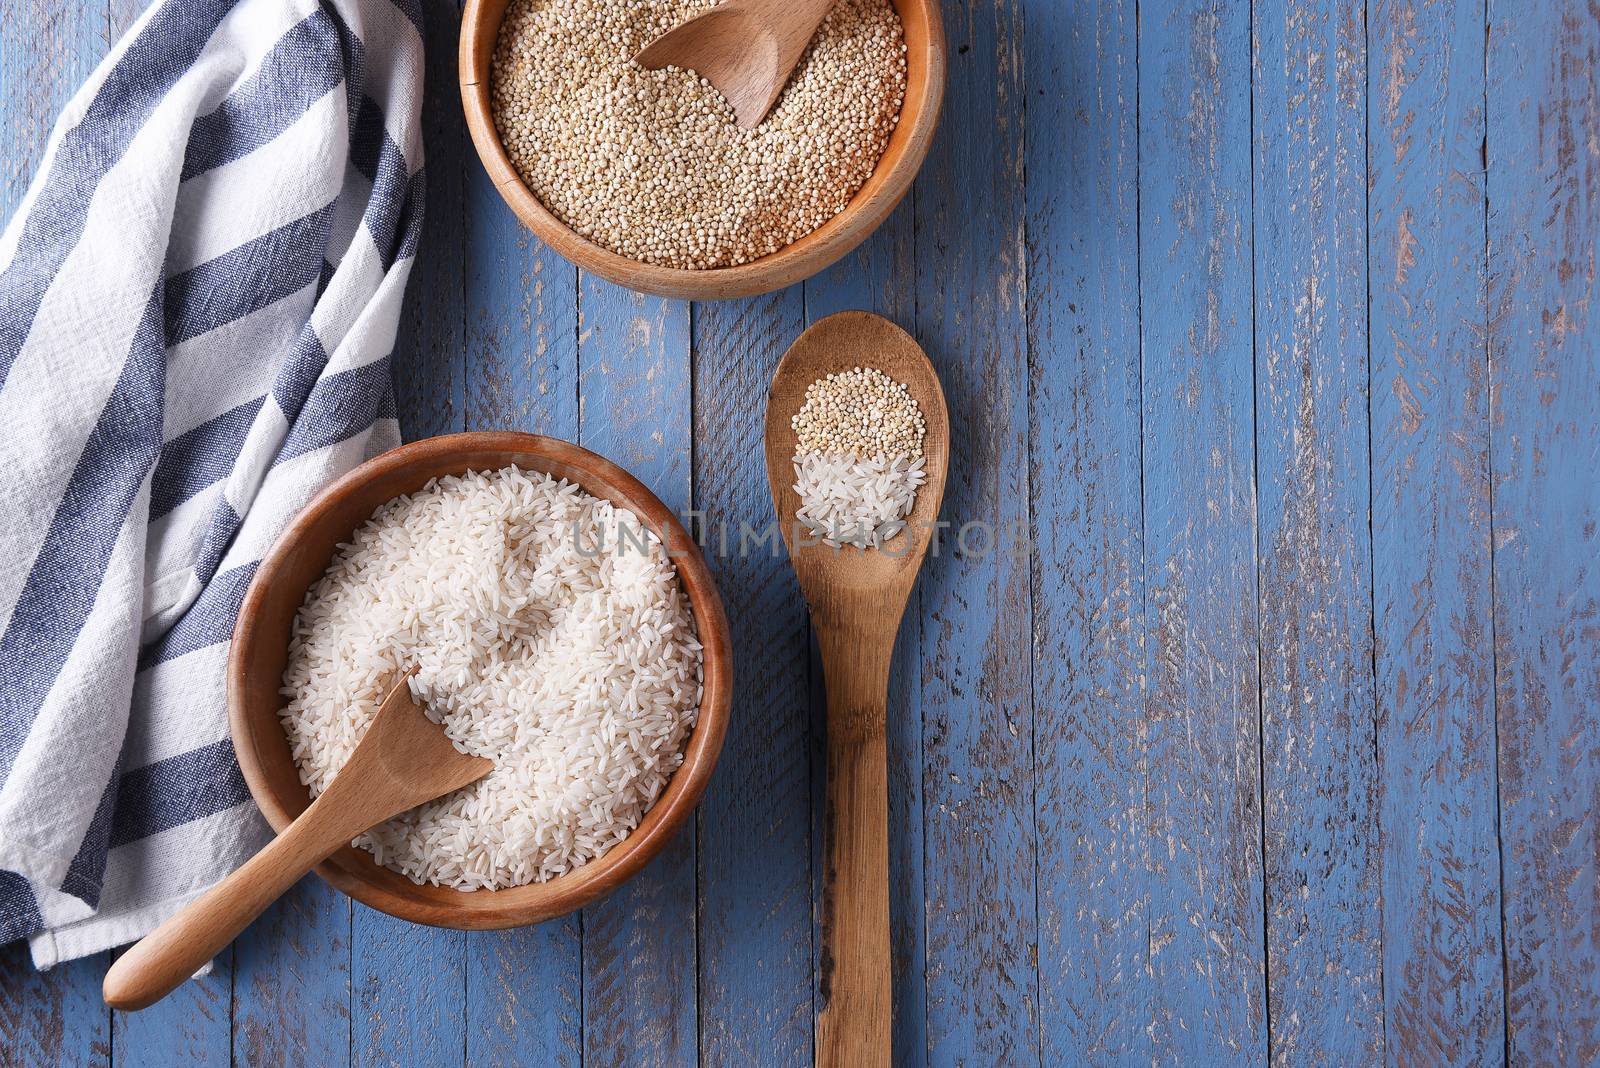 Wood Bowls of Rice and Quinoa on a rustic blue table with a kitchen towel and a wooden spoon. Horizontal format with copy space.